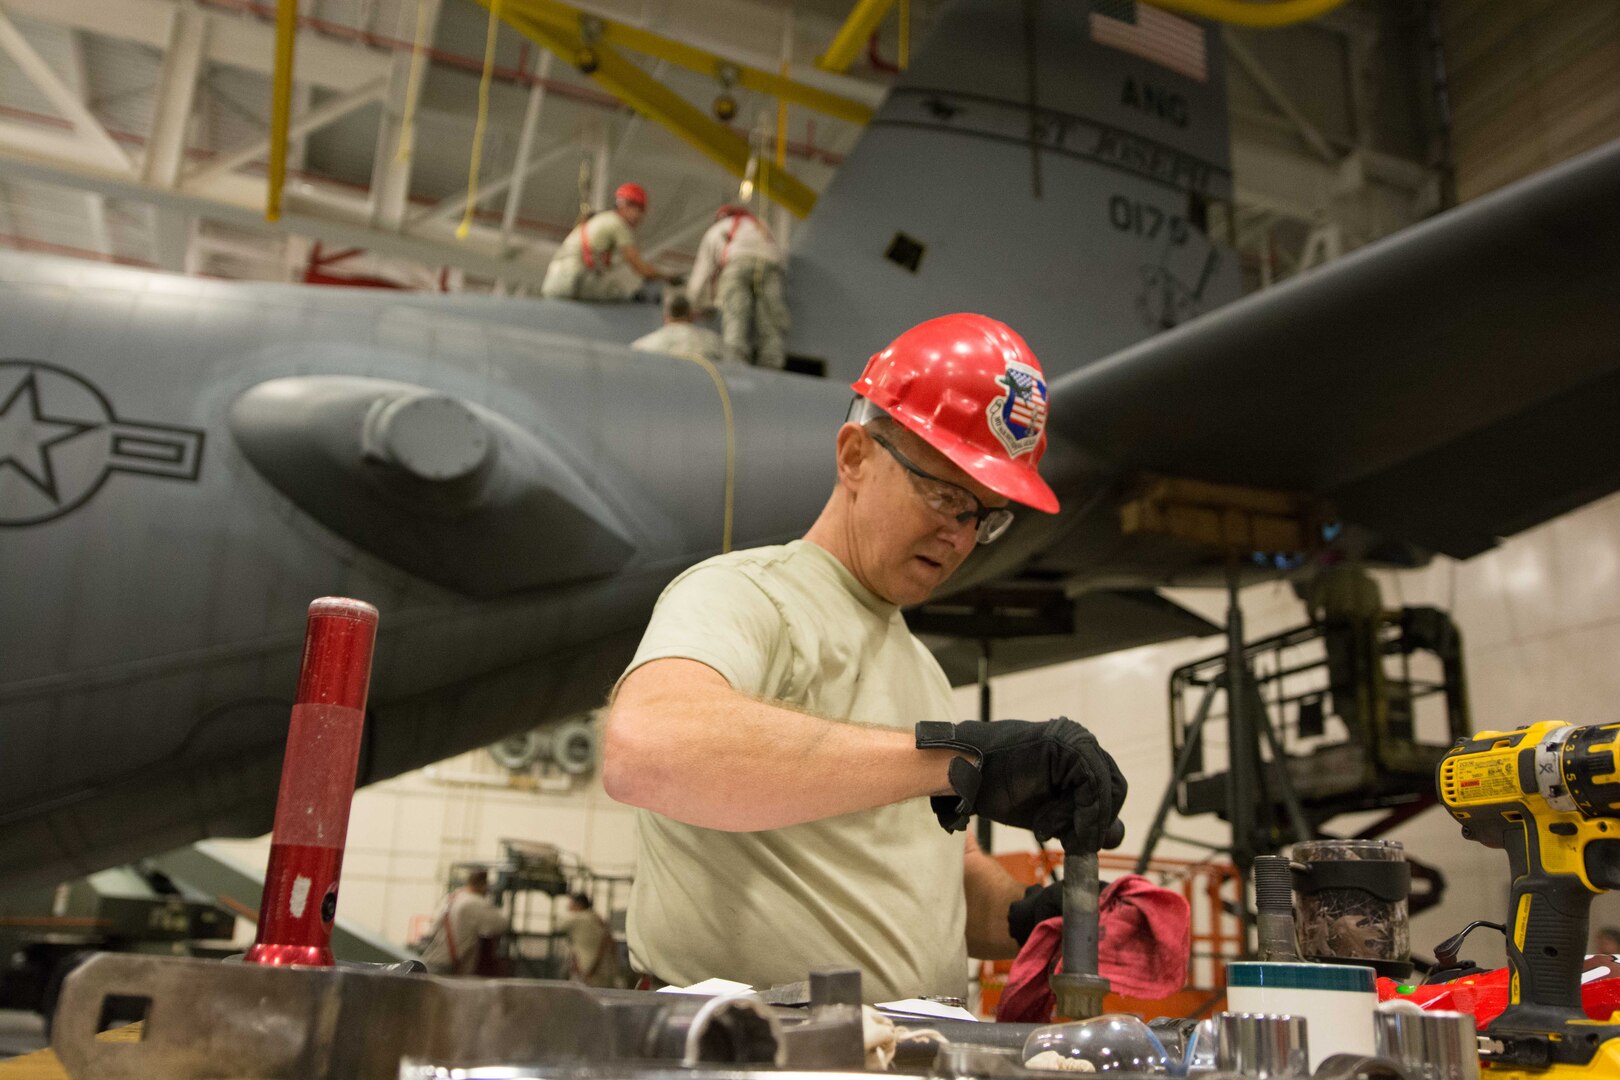 U.S. Air Force Master Sgt. Brent Rose, a repair and reclamation specialist assigned to the 139th Maintenance Squadron, Missouri Air National Guard, wipes down a bolt from a C-130 Hercules aircraft at Rosecrans Air National Guard Base, St. Joseph, Mo., Feb. 7, 2017. Rose was assisting with aircraft maintenance that required the removal of the vertical stabilizer, or tail, of the aircraft. 